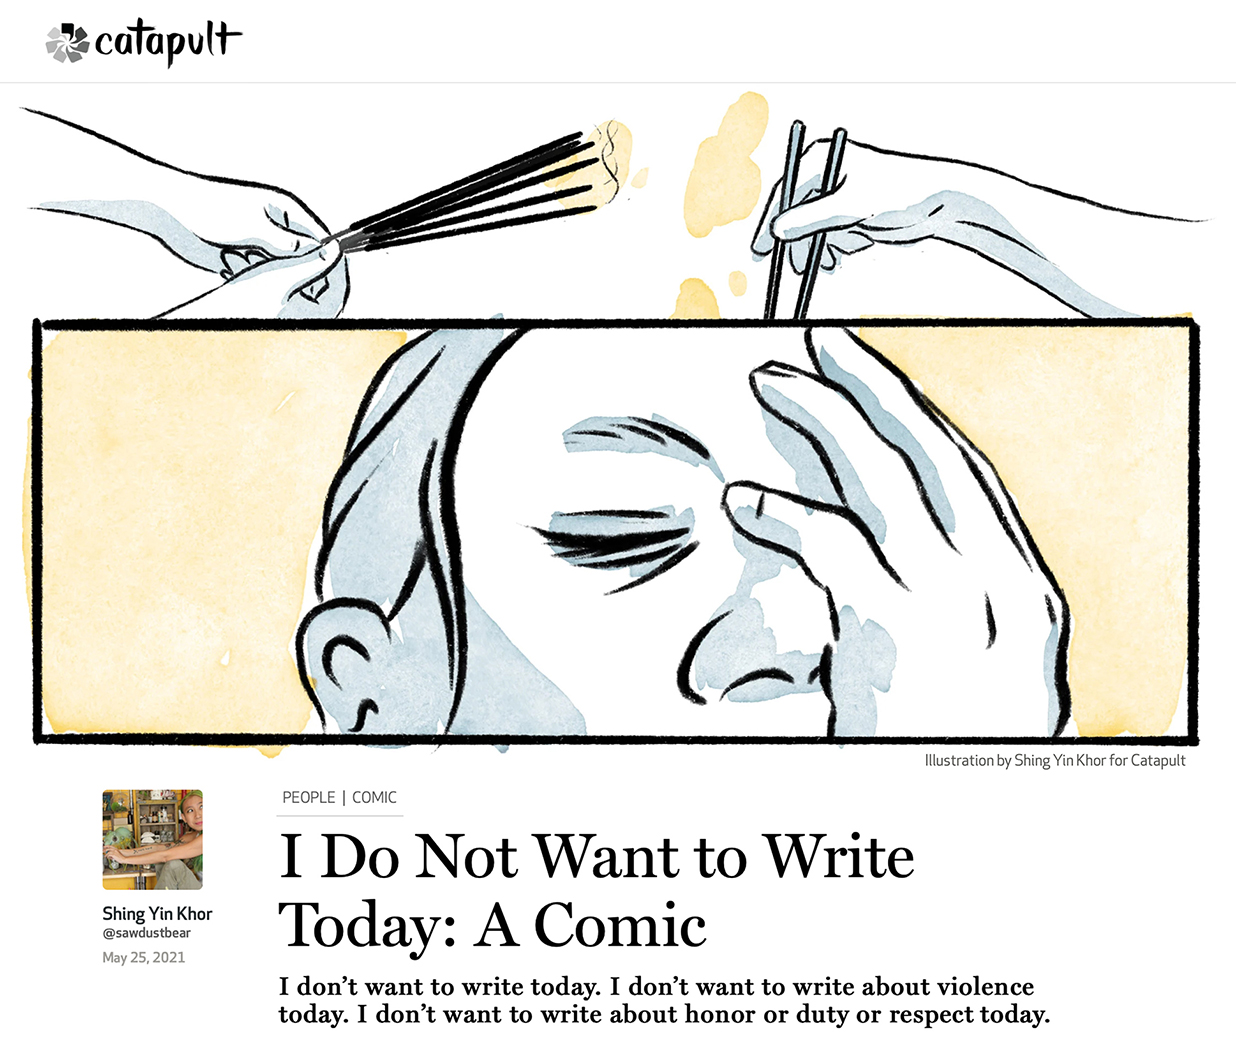 “I Do Not Want to Write Today: A Comic,” illustrations by Shing Yin Khor, May 25